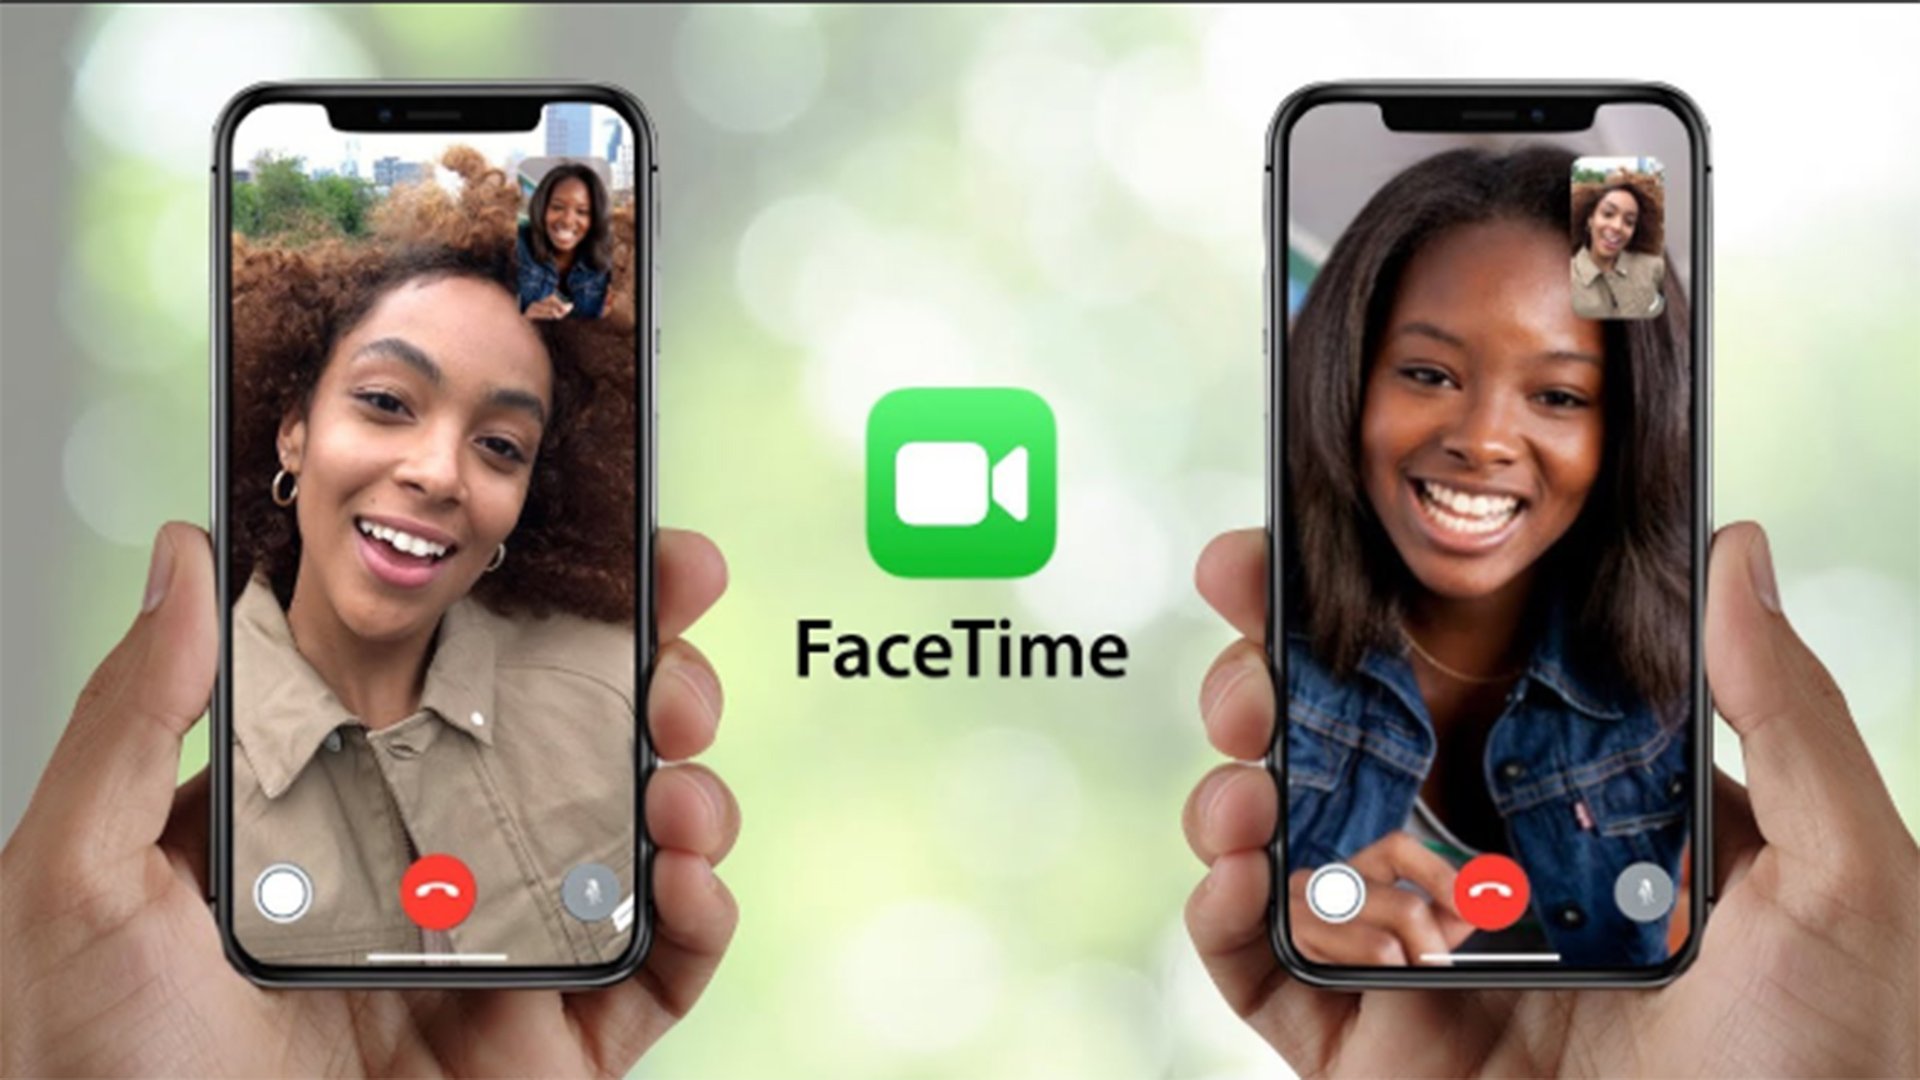 FaceTime is both clever and freaky at the same